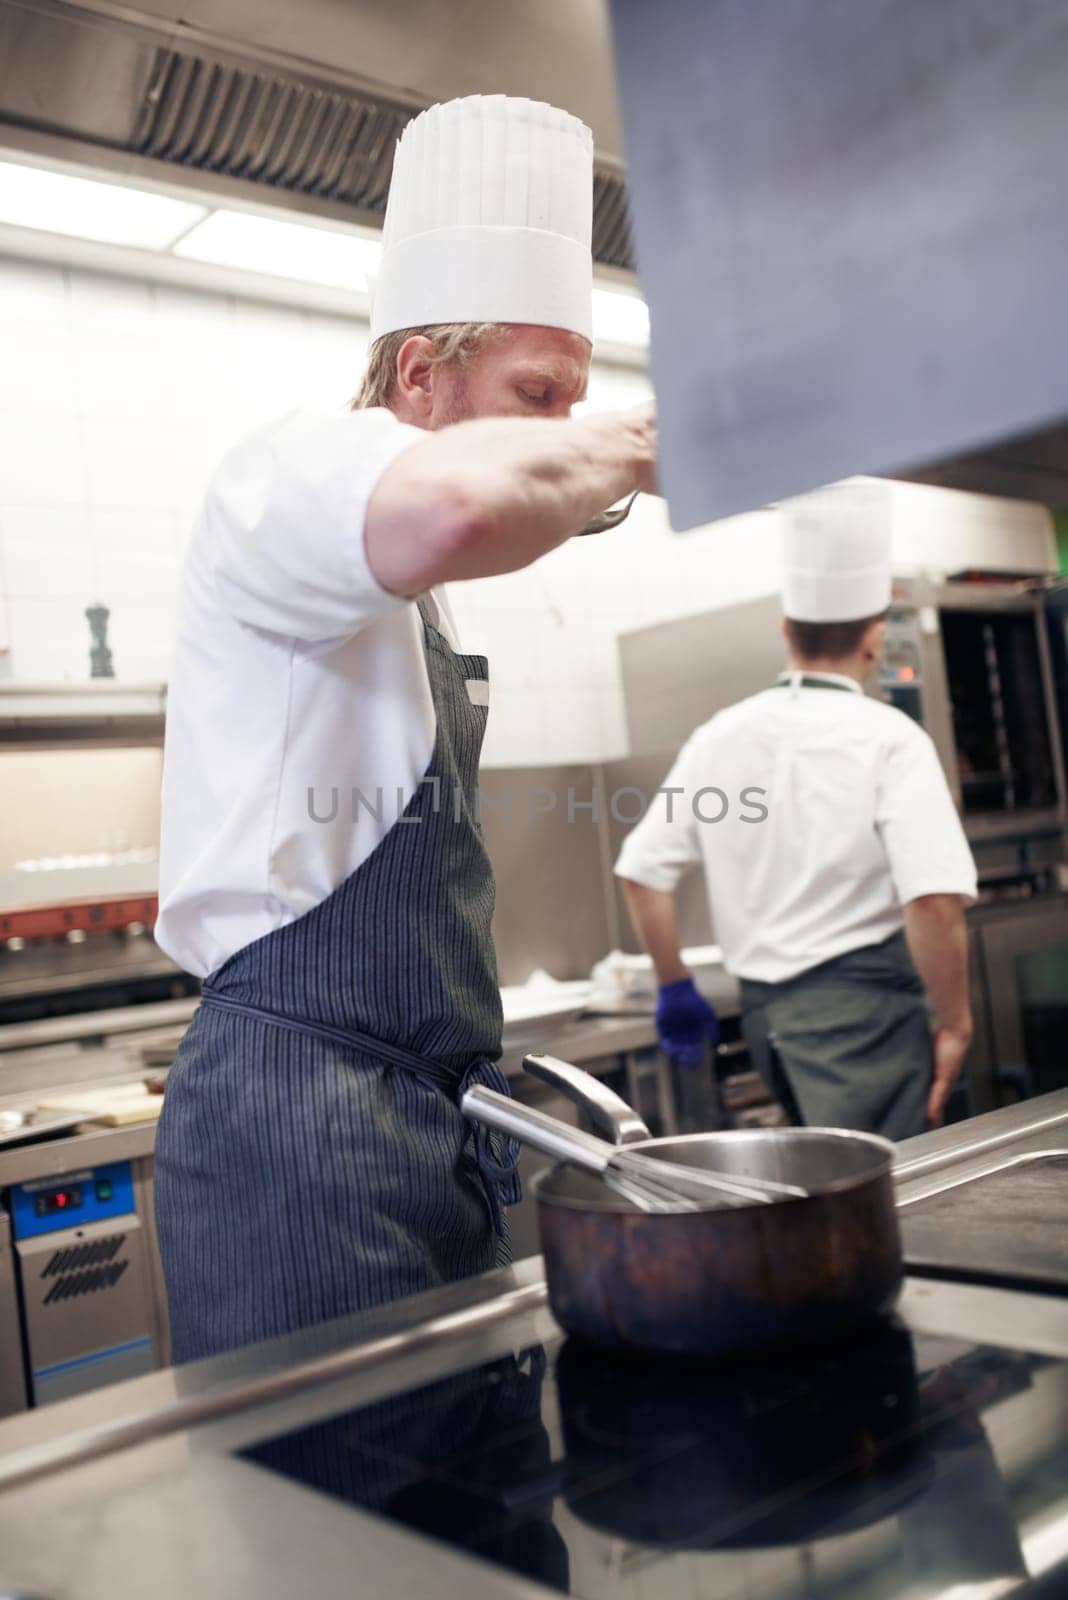 Always taste your food. chefs preparing a meal service in a professional kitchen